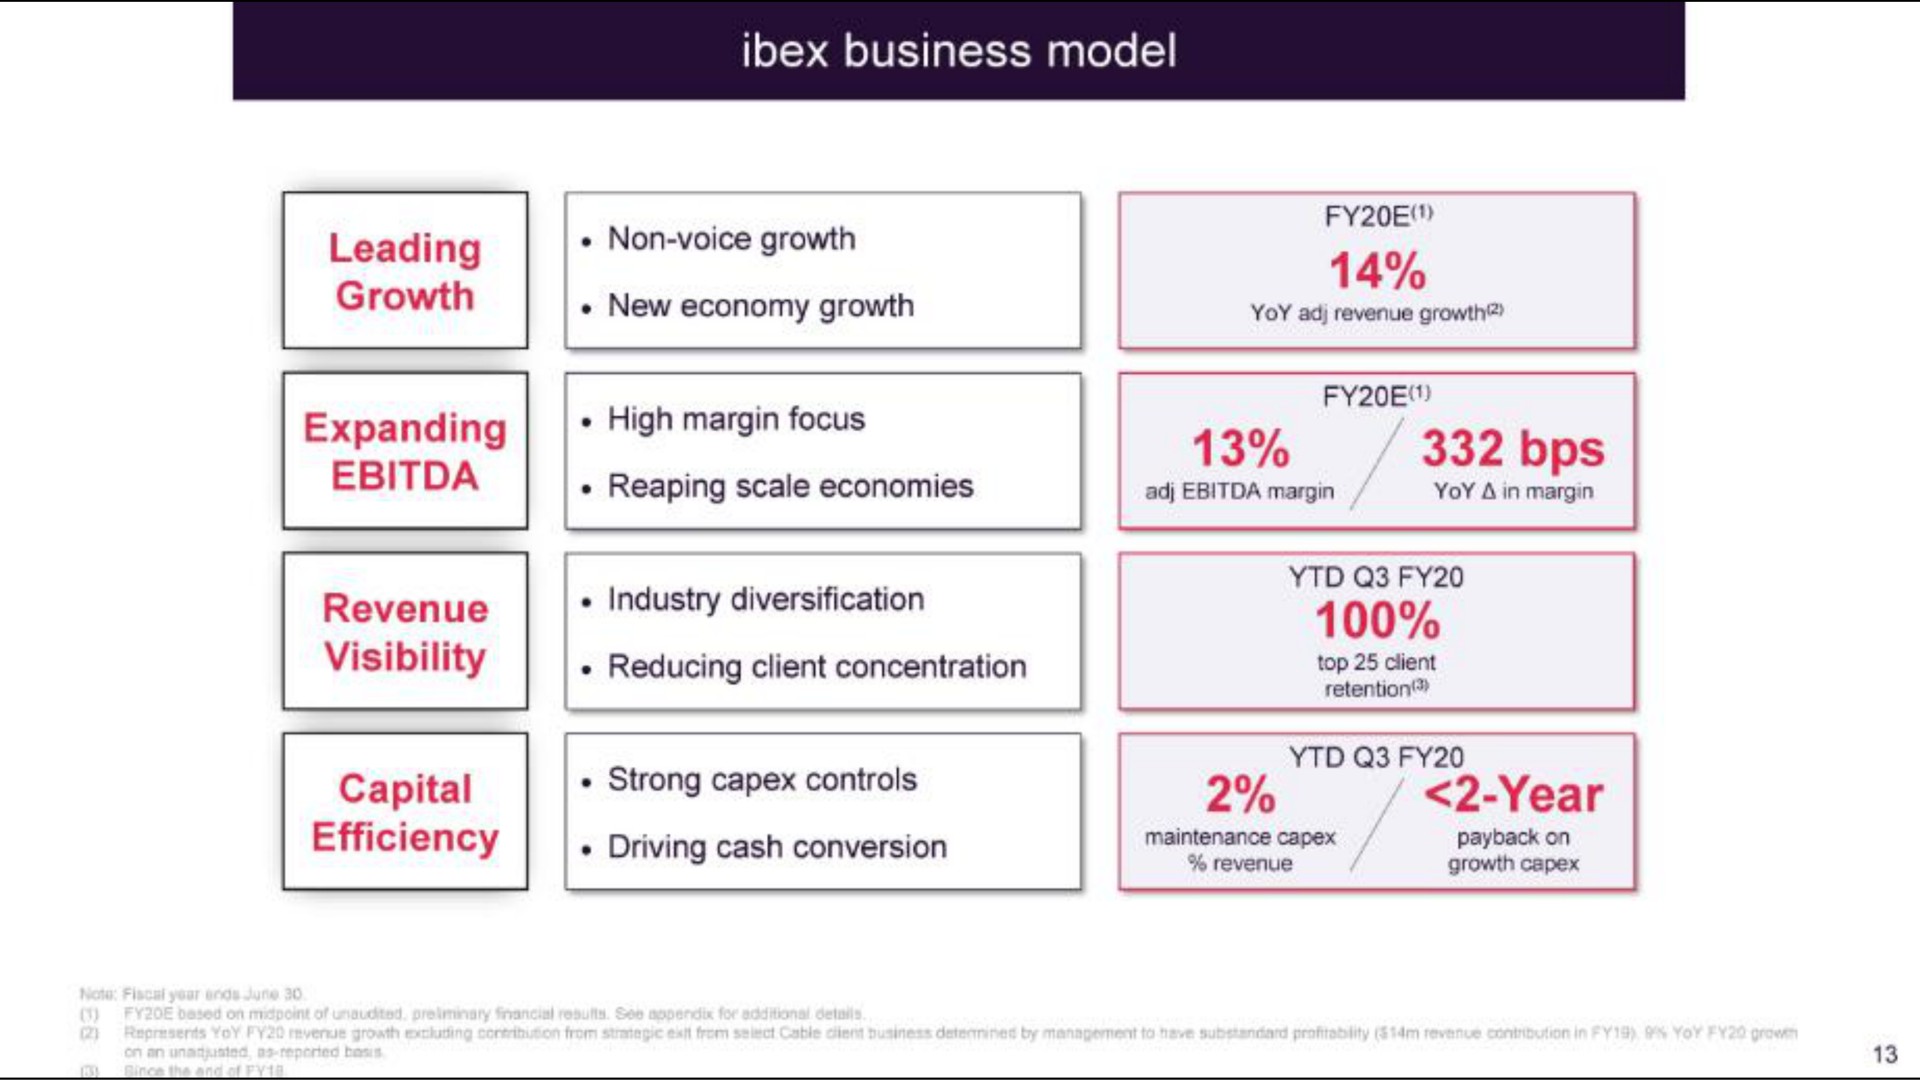 ibex business model growth evens visibility reducing client concentration top cant capital efficiency cap driving cash conversion cape year on | IBEX